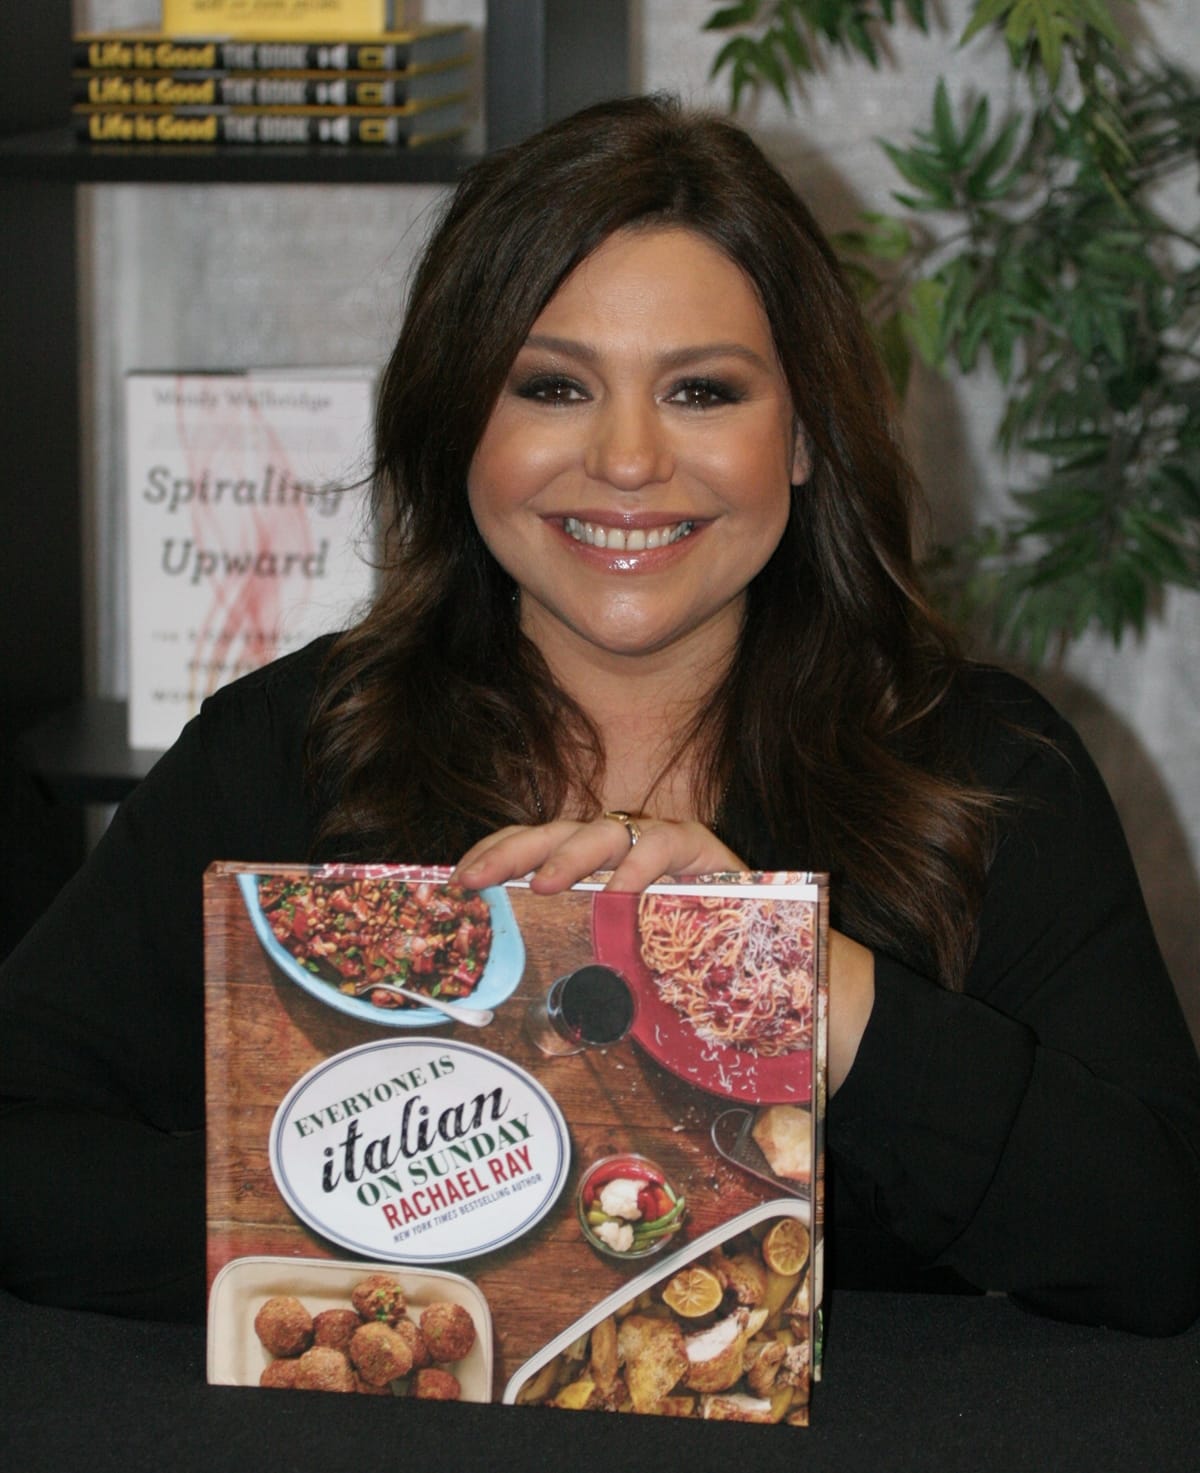 Wealthy celebrity chef Rachael Ray poses with her book, "Everyone is Italian on Sunday" during Pennsylvania Conference For Women